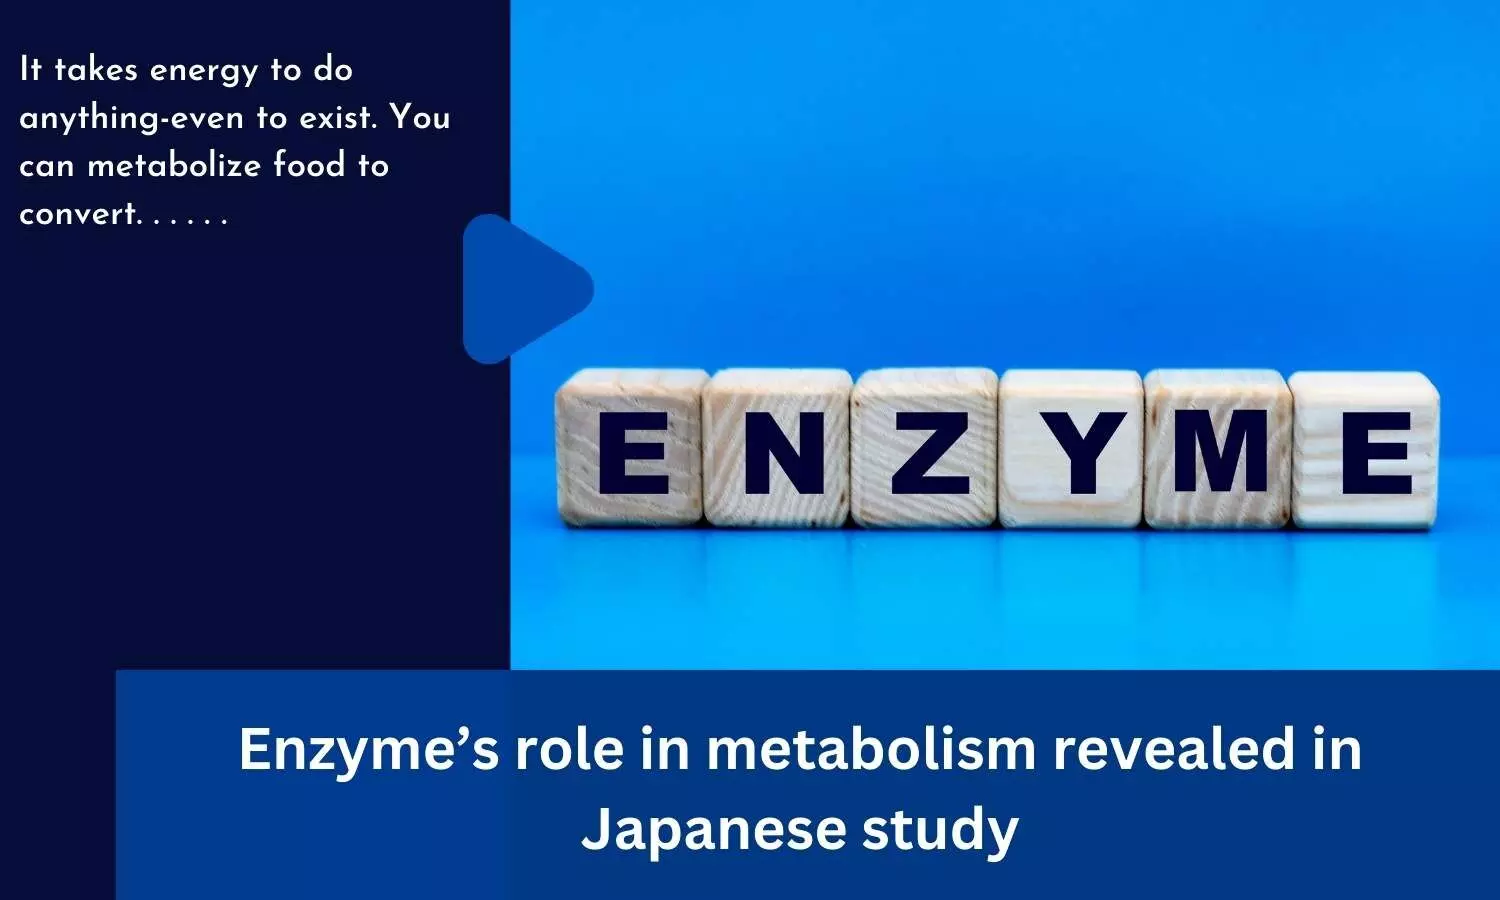 Enzymes role in metabolism revealed in Japanese study